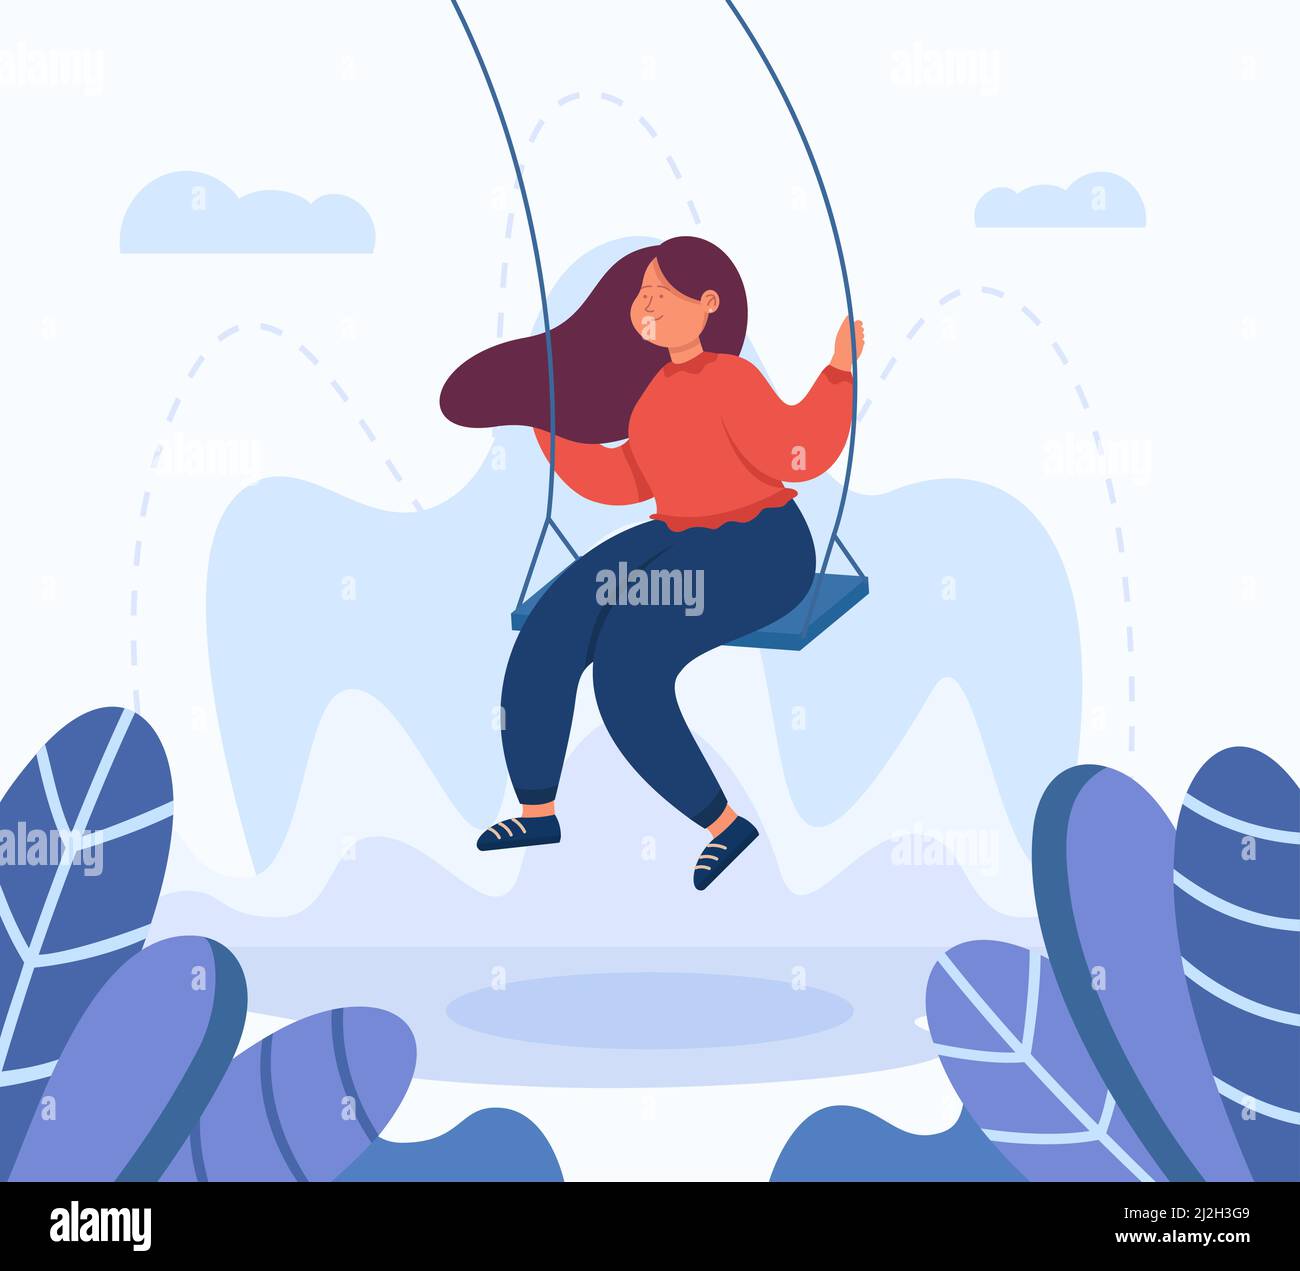 Adult female cartoon character swinging on swing. Happy girl in good mood having fun outdoors flat vector illustration. Lifestyle, leisure concept for Stock Vector